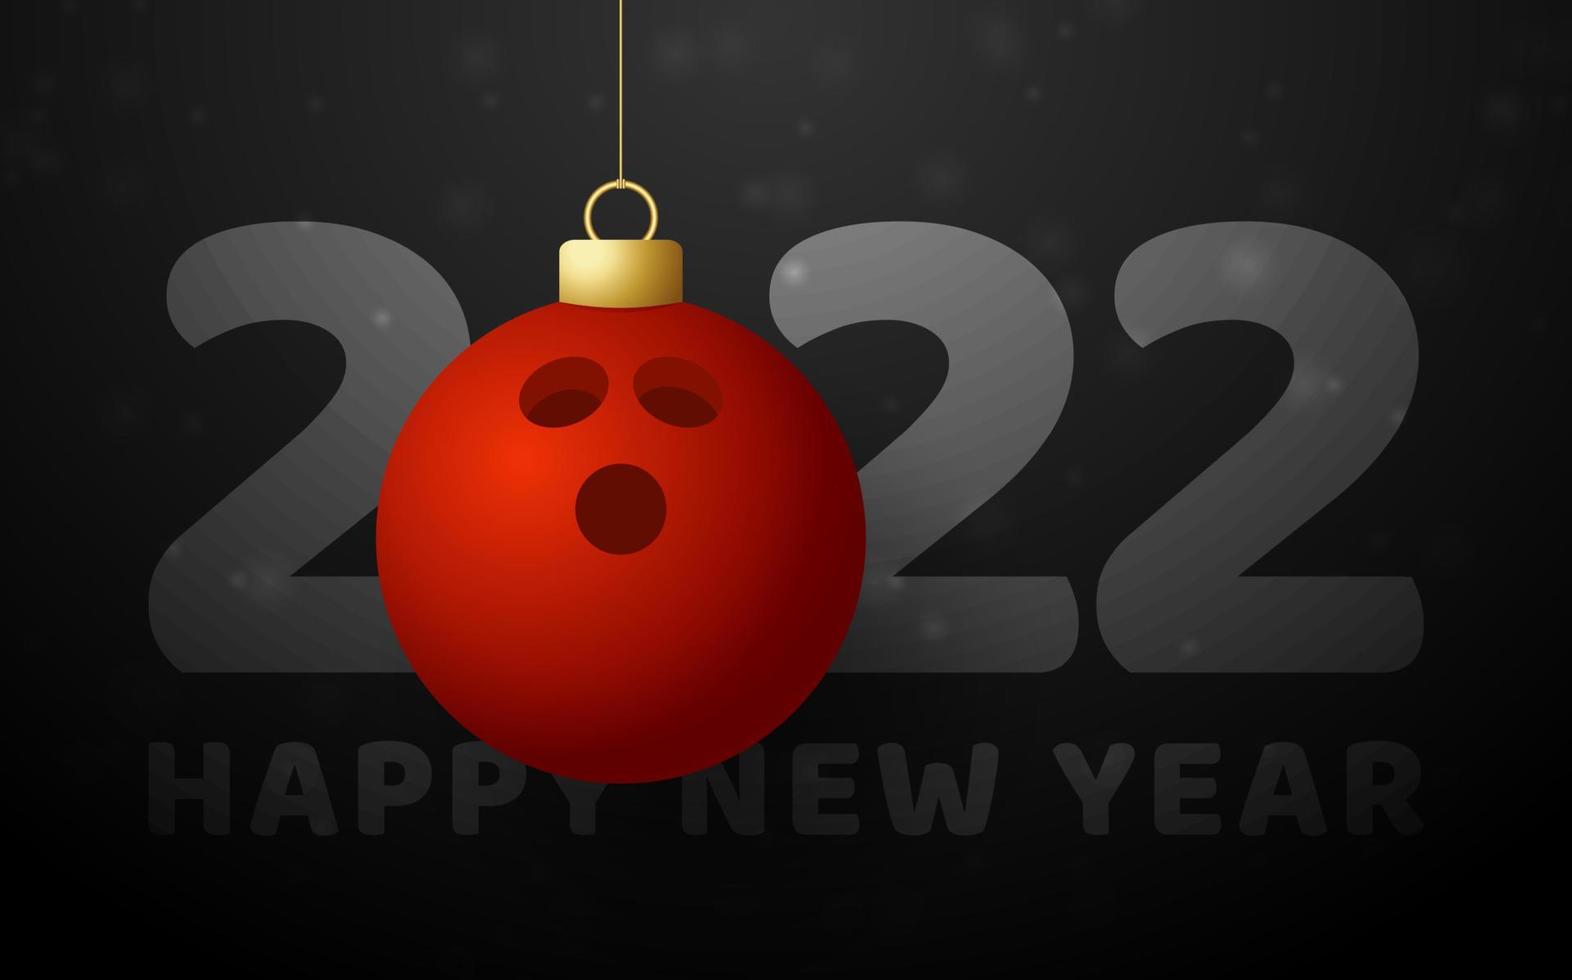 2022 Happy New Year. Sports greeting card with a bowling ball on the luxury background with snowflake. Vector illustration.